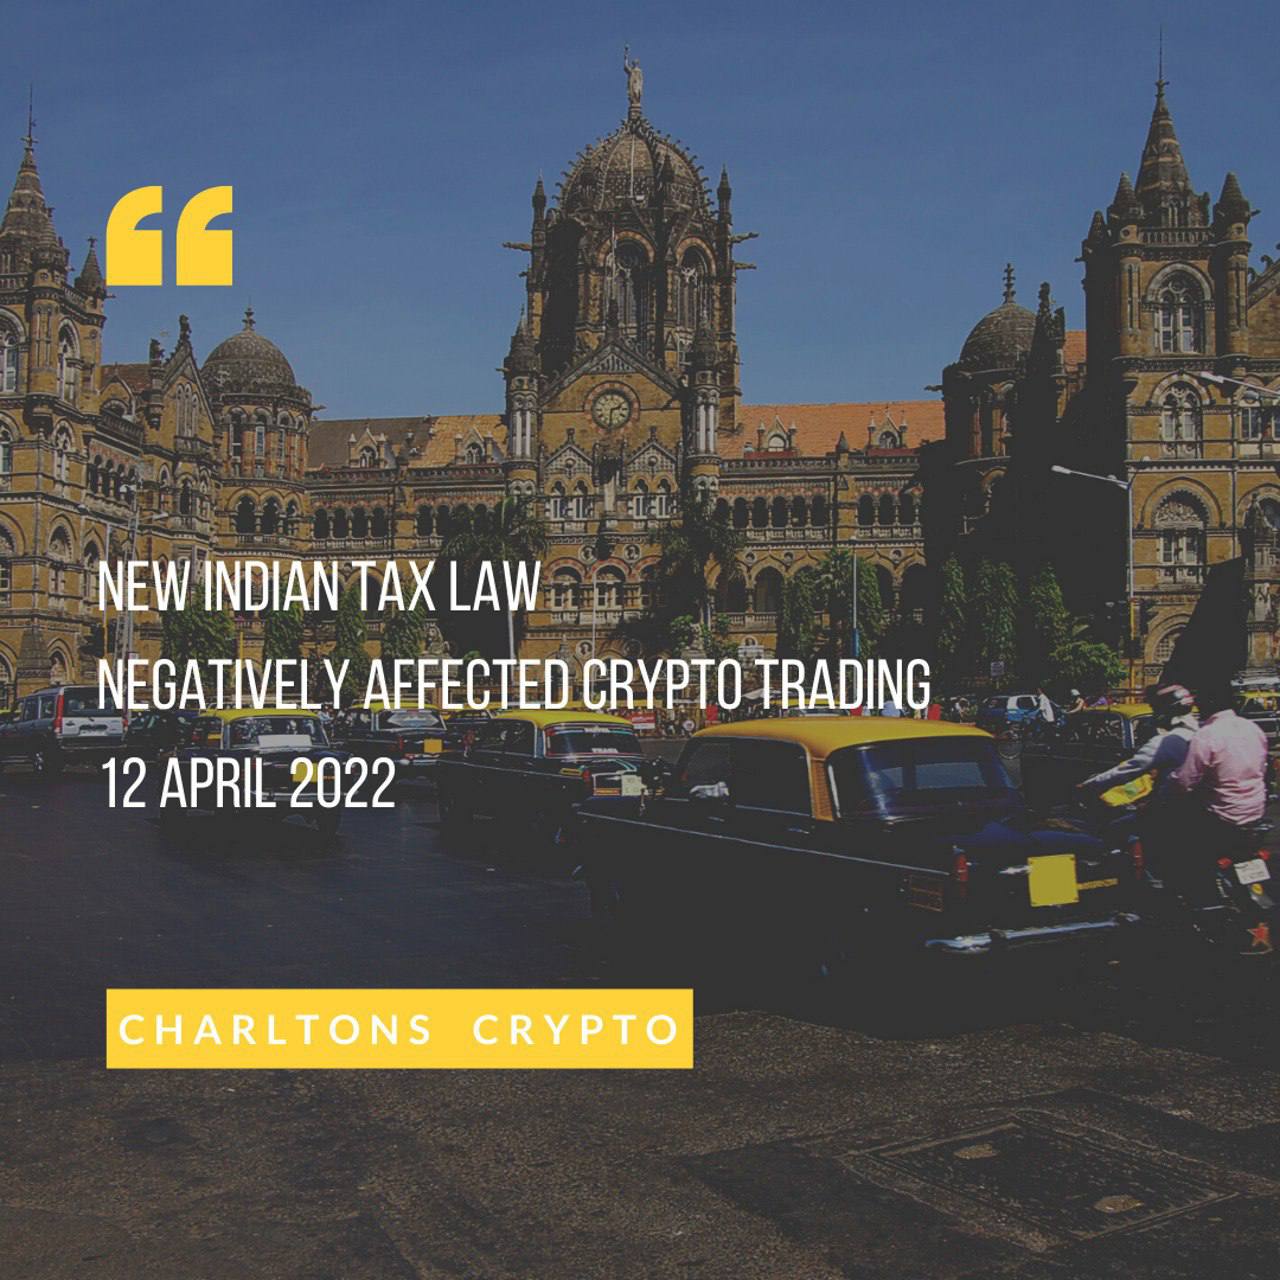 New Indian Tax Law Negatively Affected Crypto Trading